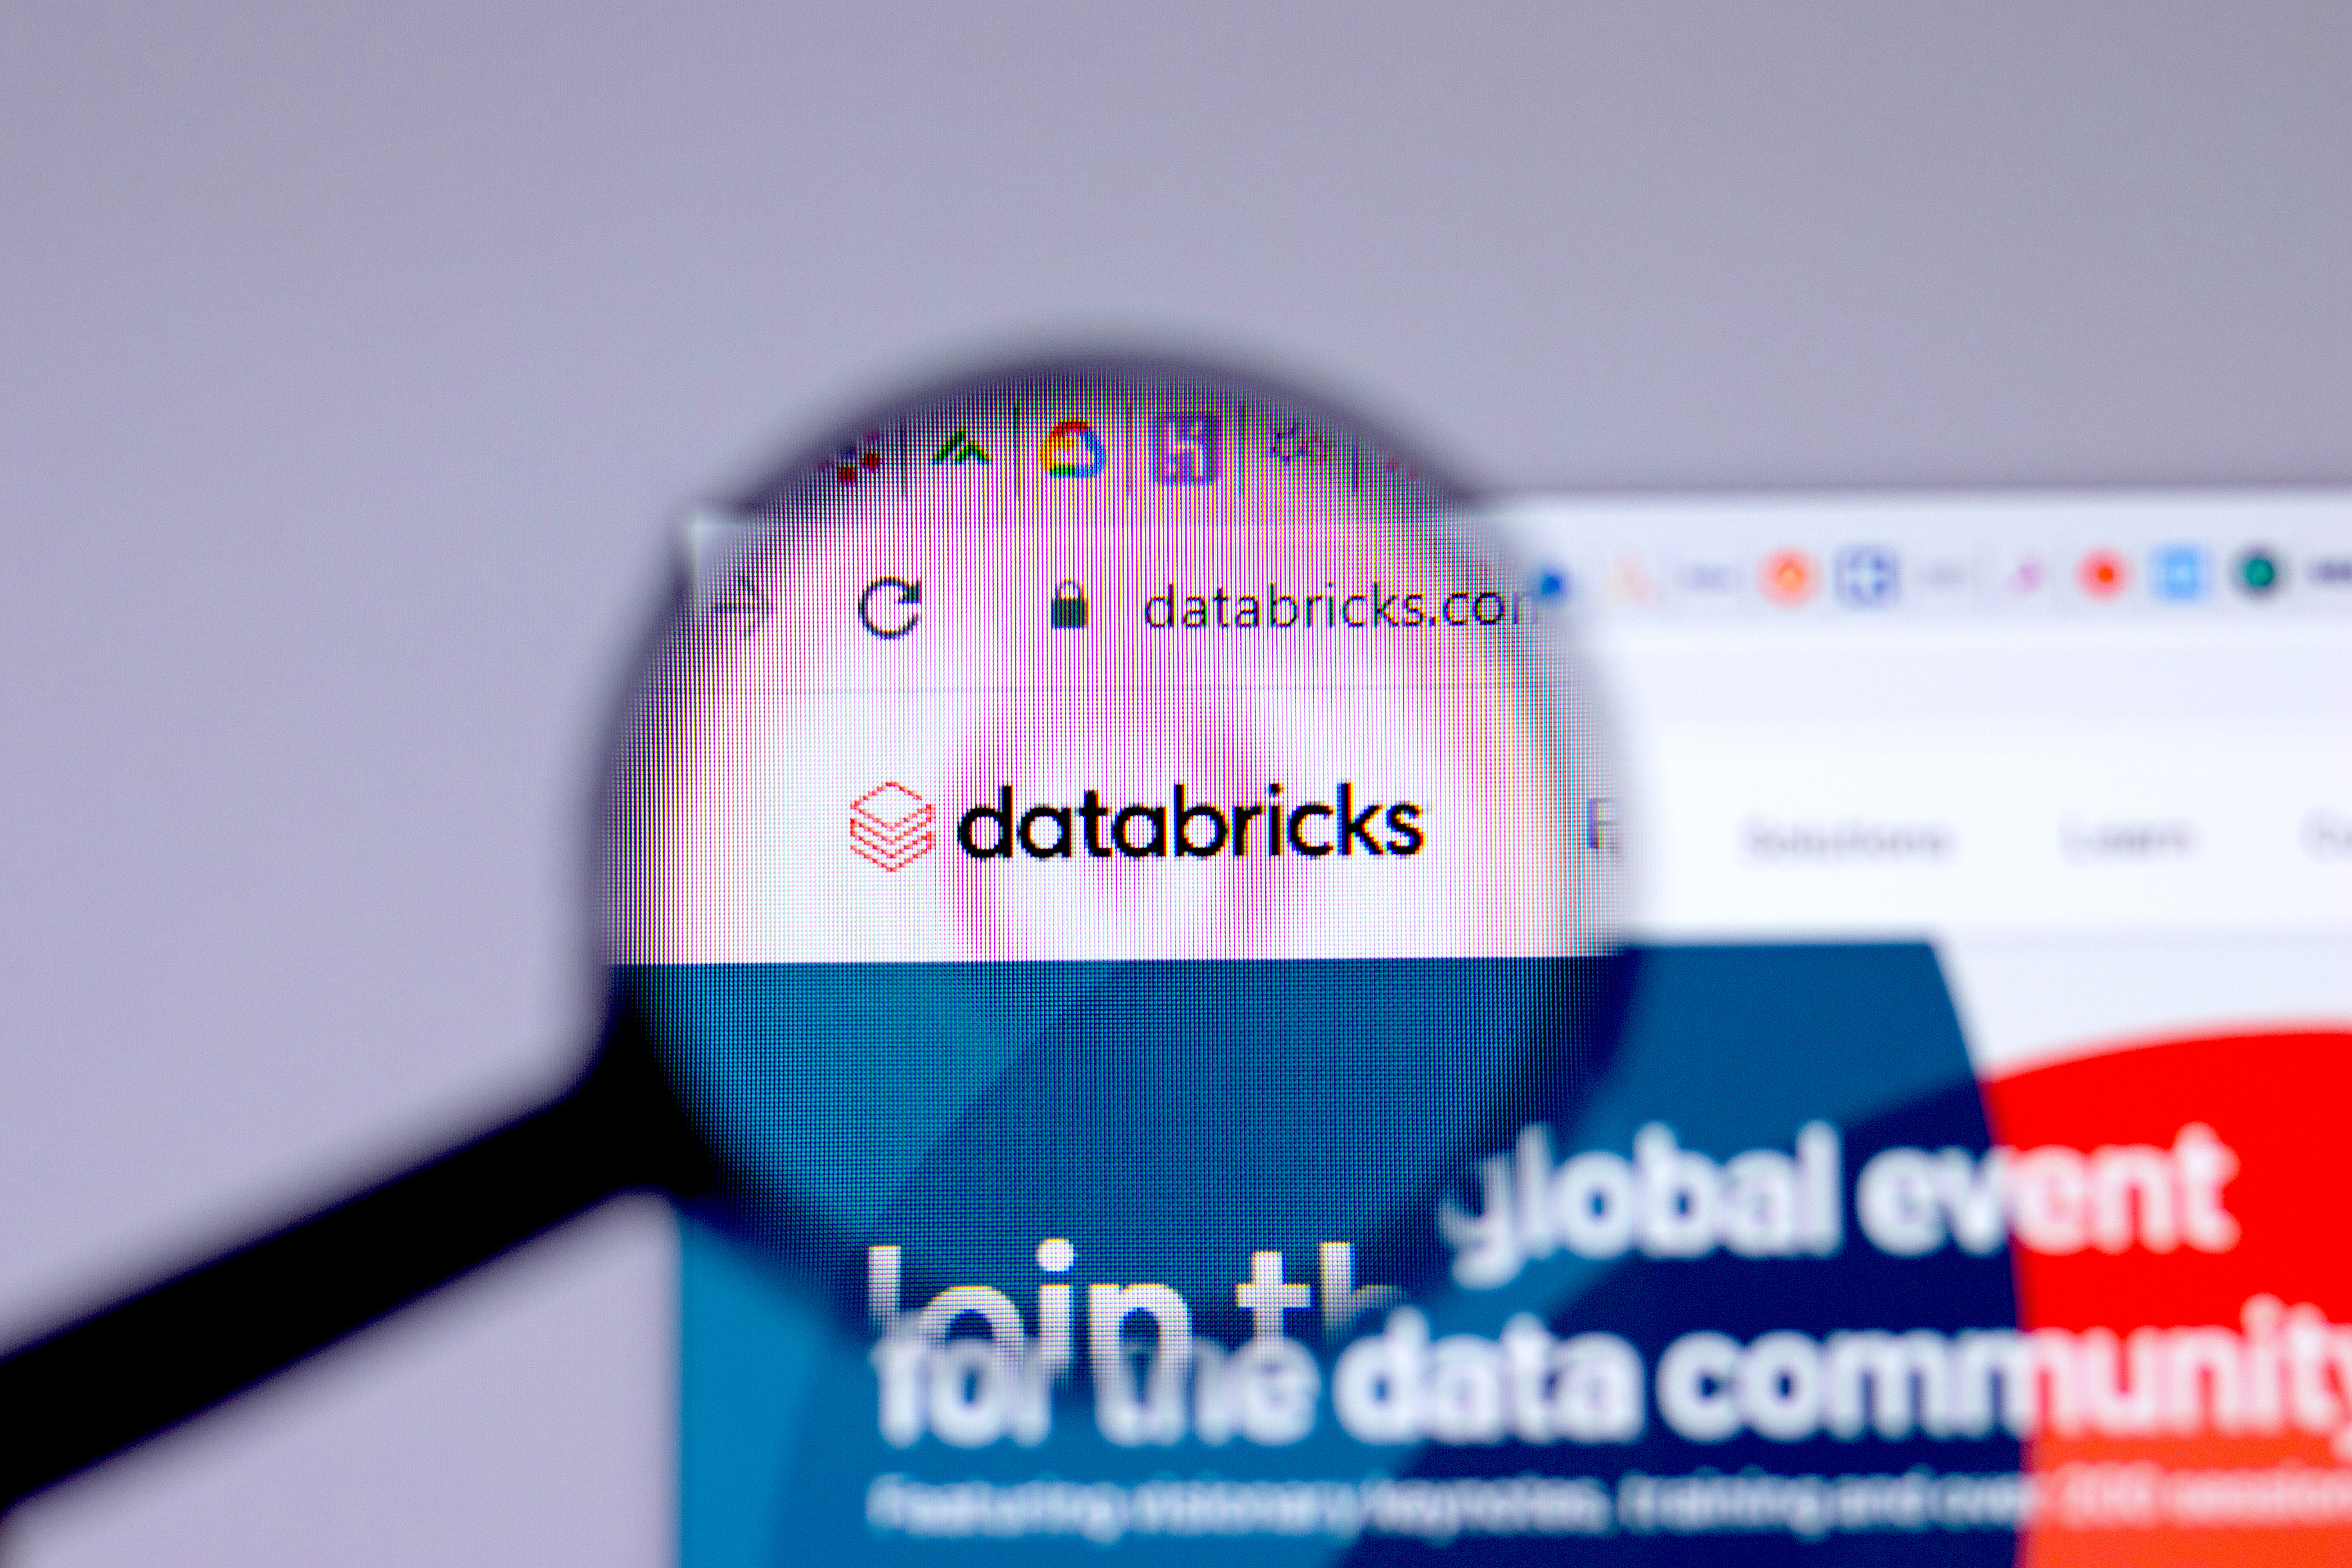 Databricks faces critical strategic decisions. Here’s why.